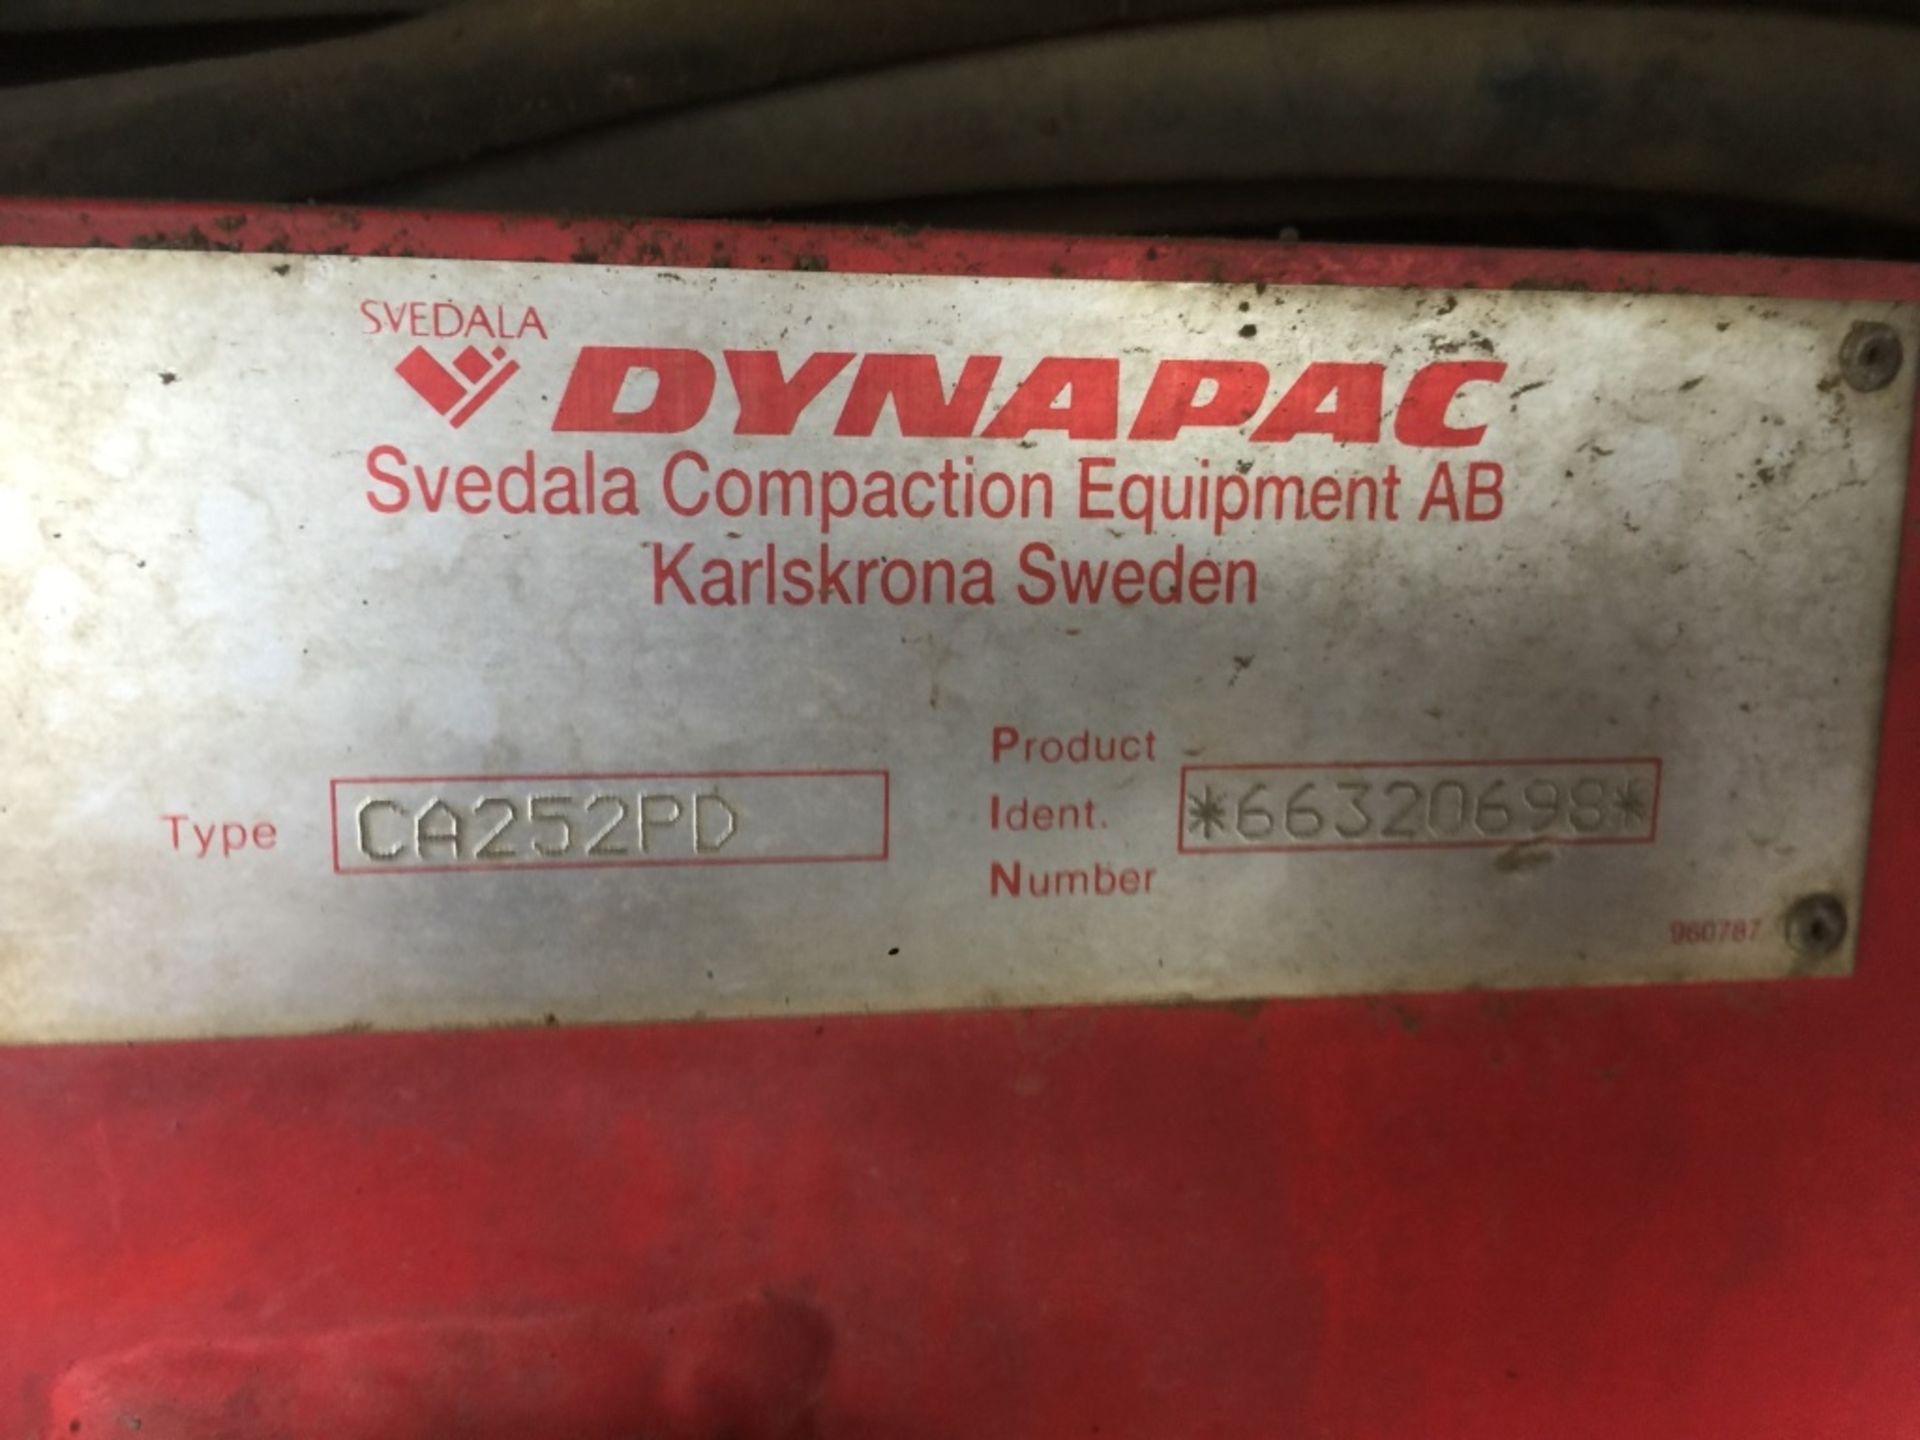 1999 Dynapac CA252 Vibratory Compactor - Image 26 of 26